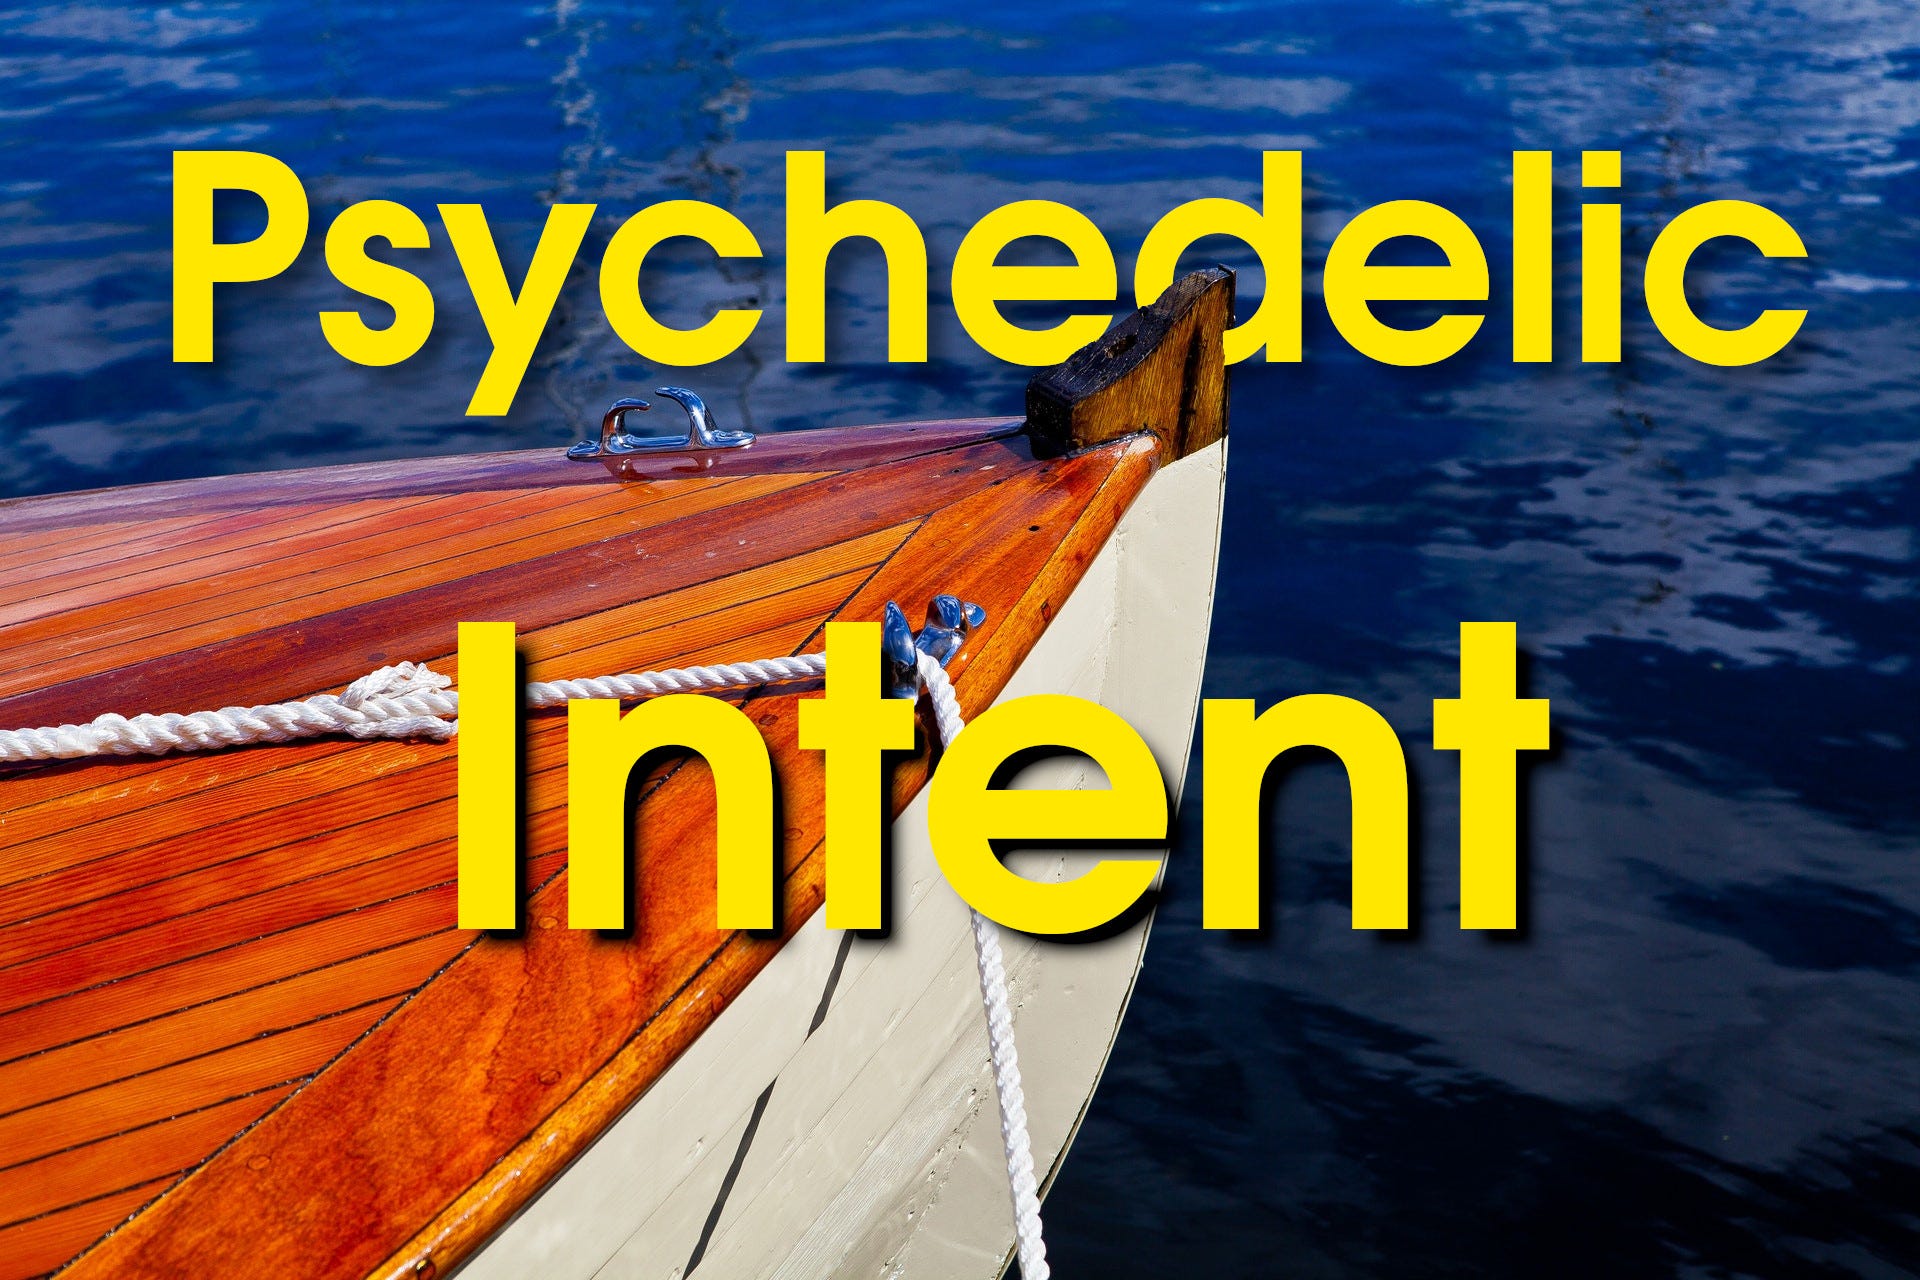 psychedelic intent how to guide a trip